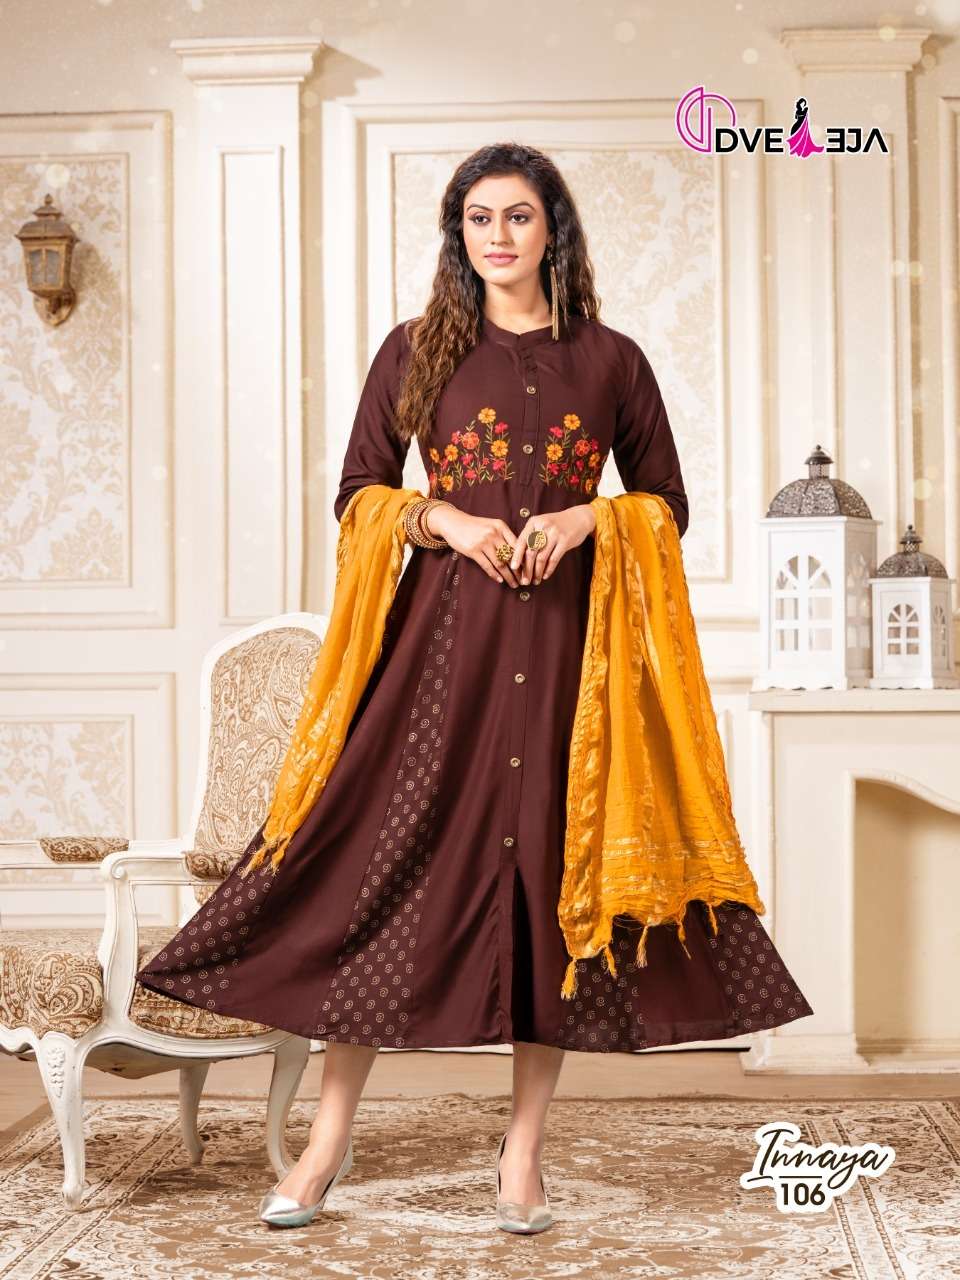 INNAYA BY DVEEJA 101 TO 108 SERIES BEAUTIFUL STYLISH FANCY COLORFUL CASUAL WEAR & ETHNIC WEAR HEAVY RAYON EMBROIDERED GOWNS WITH DUPATTA AT WHOLESALE PRICE